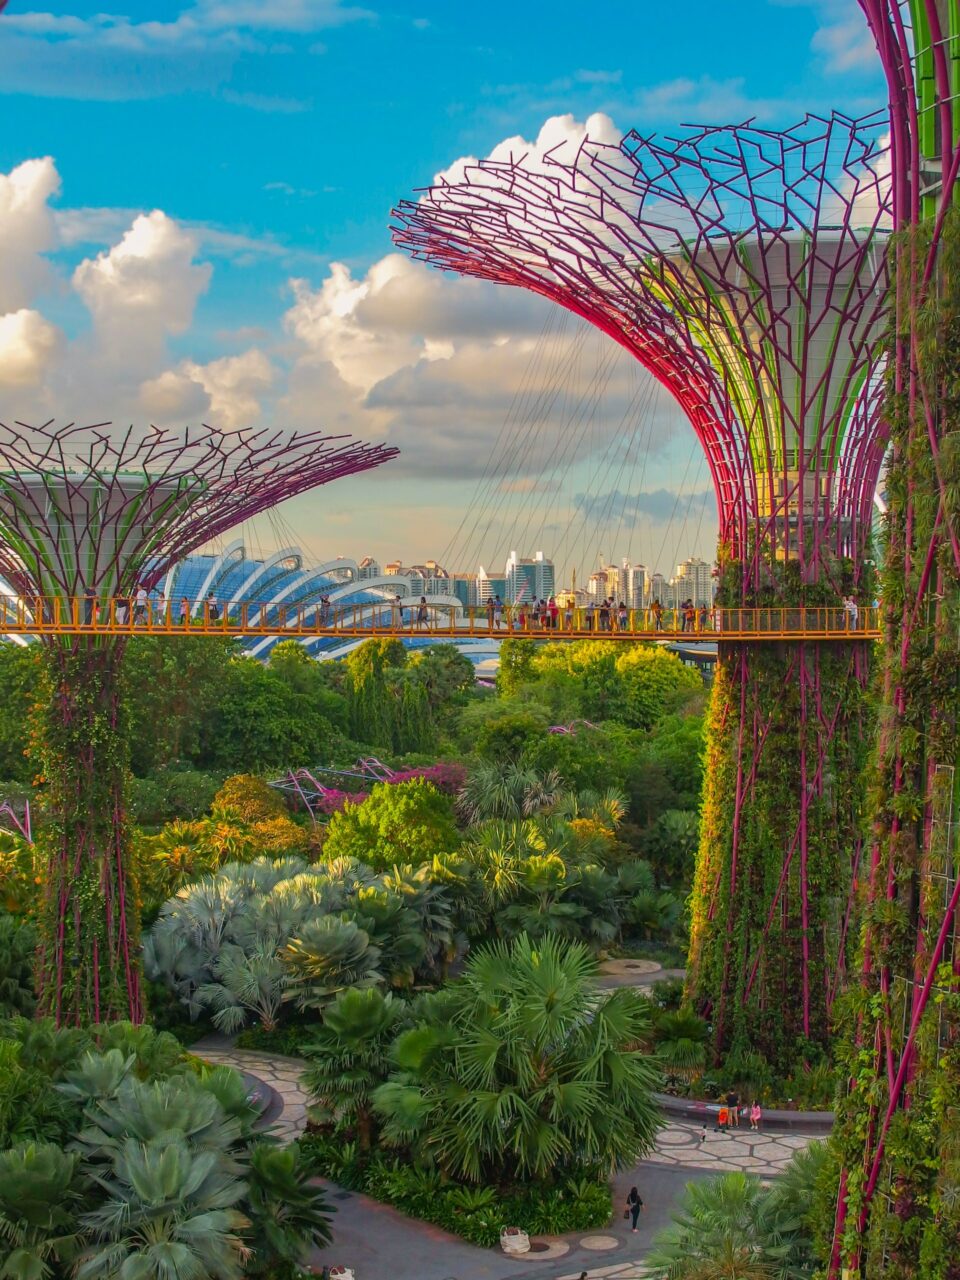 Super Tree Grove at Gardens By the Bay in Singapore